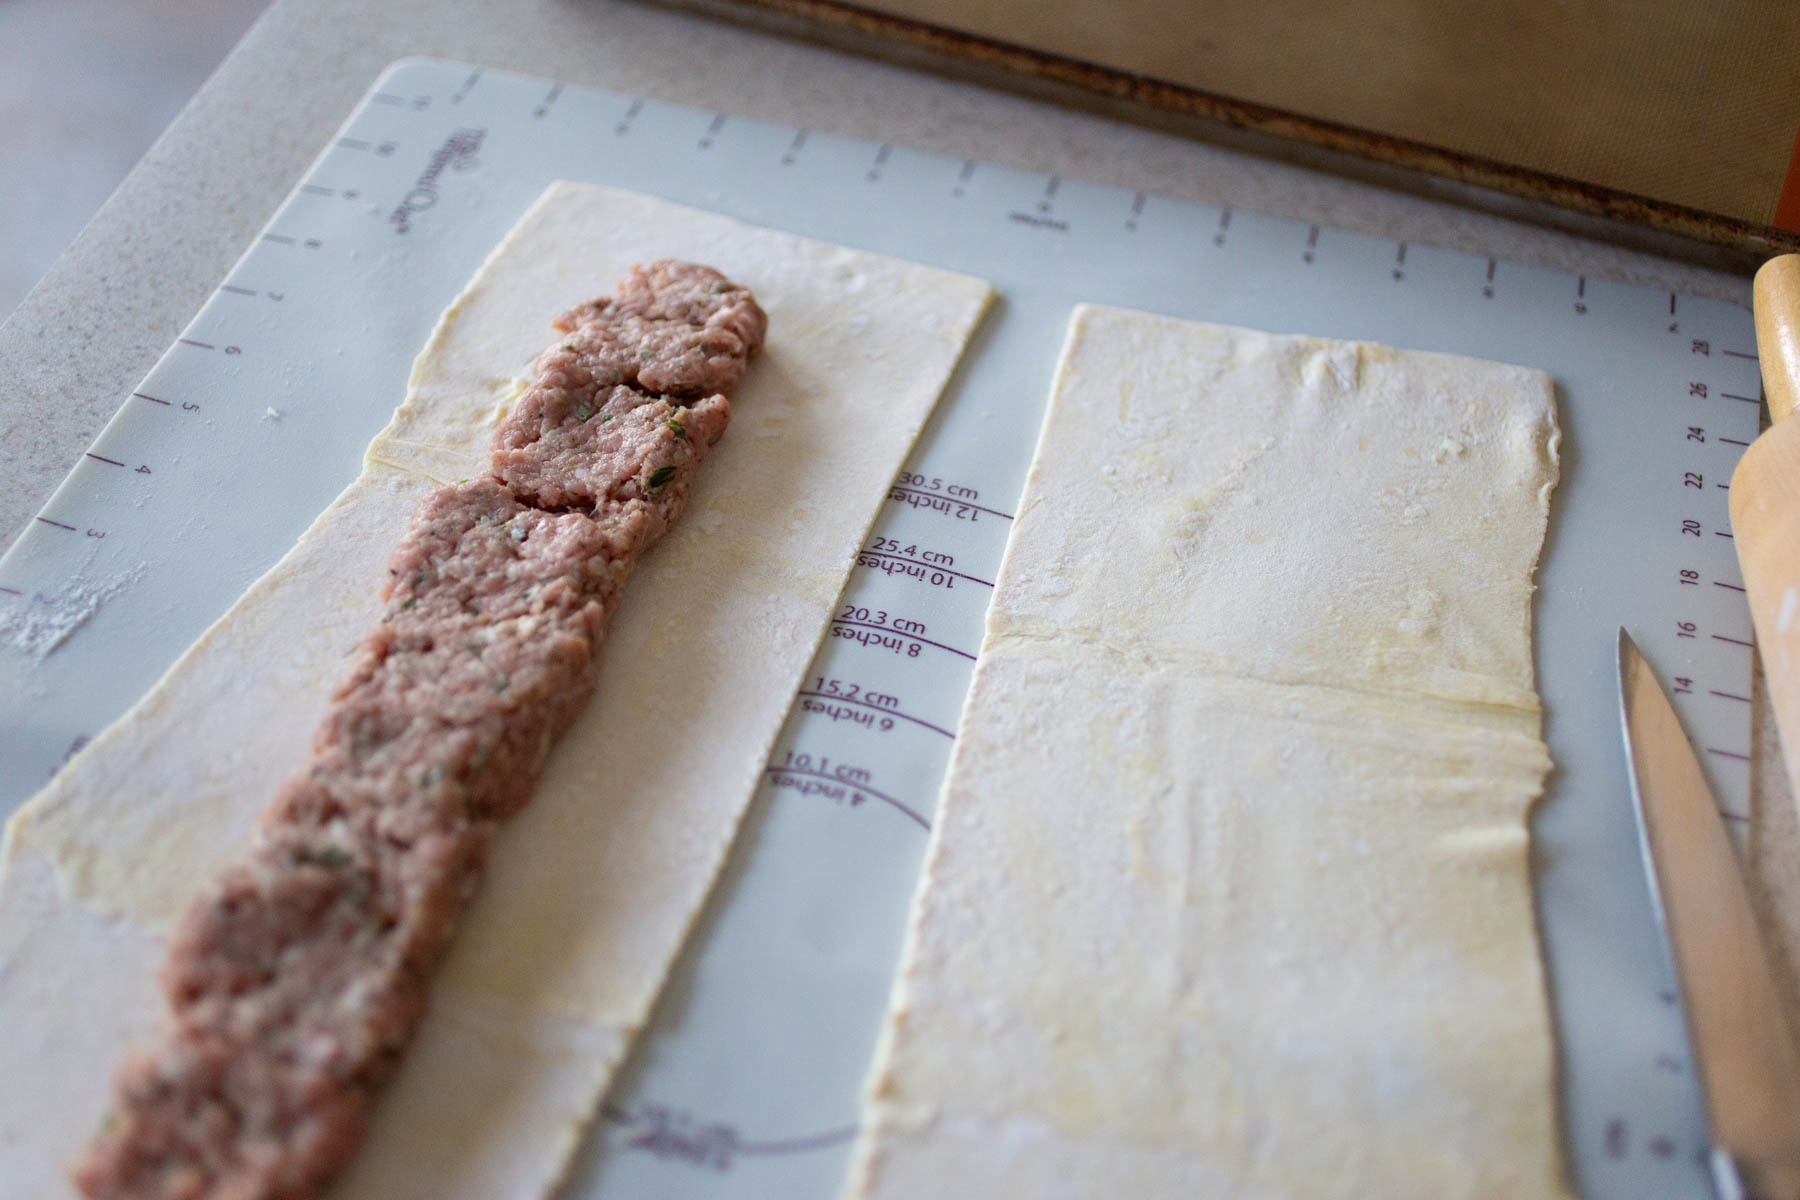 The sausage has been lined up on the pastry and is about to be rolled.